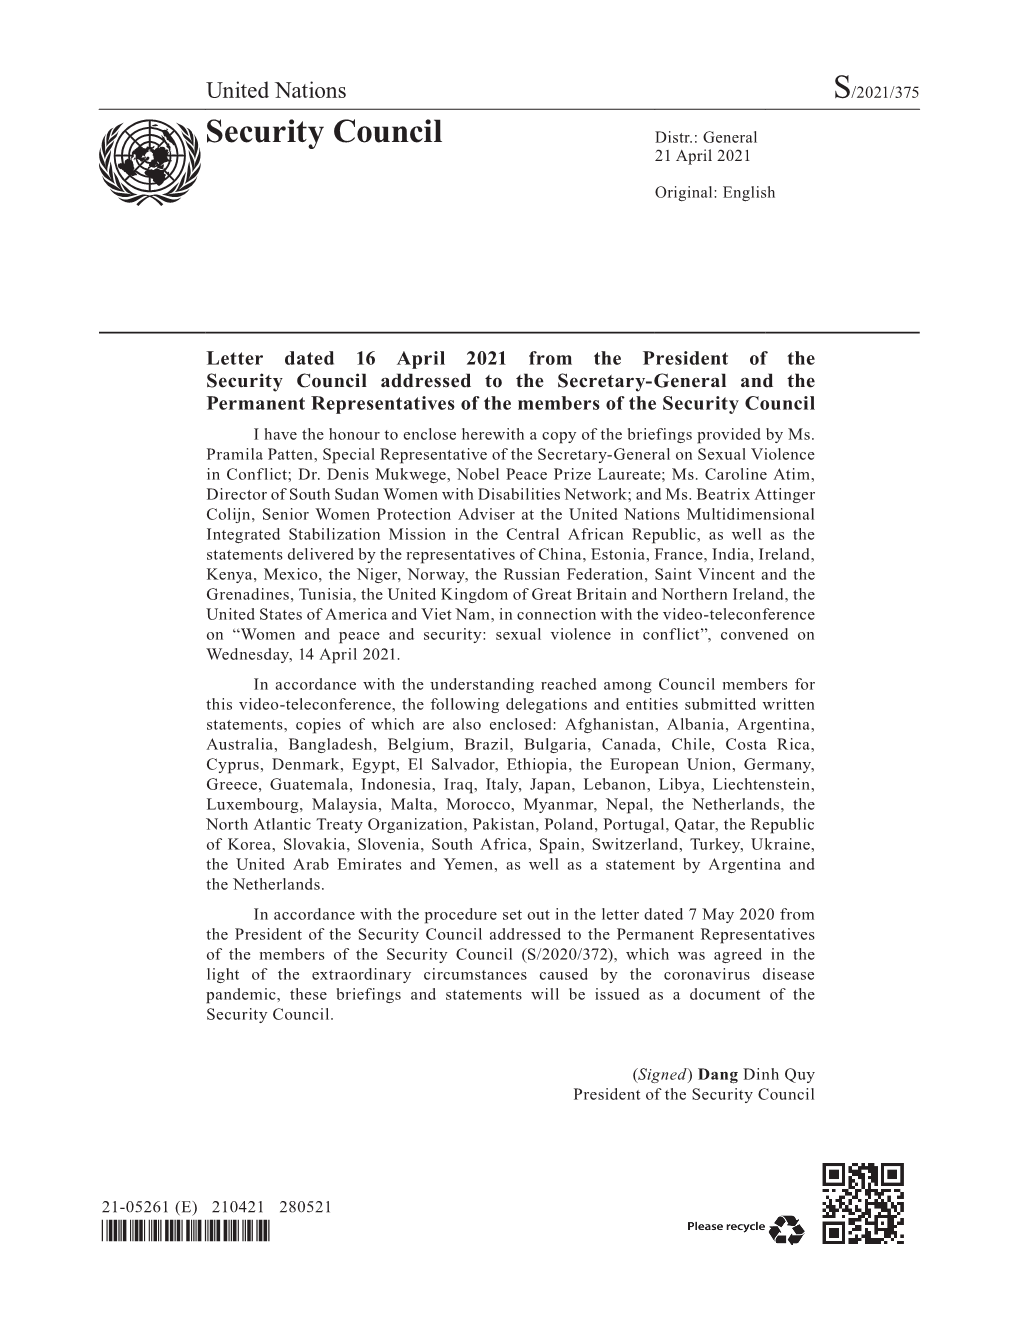 Letter Dated 16 April 2021 from the President of the Security Council